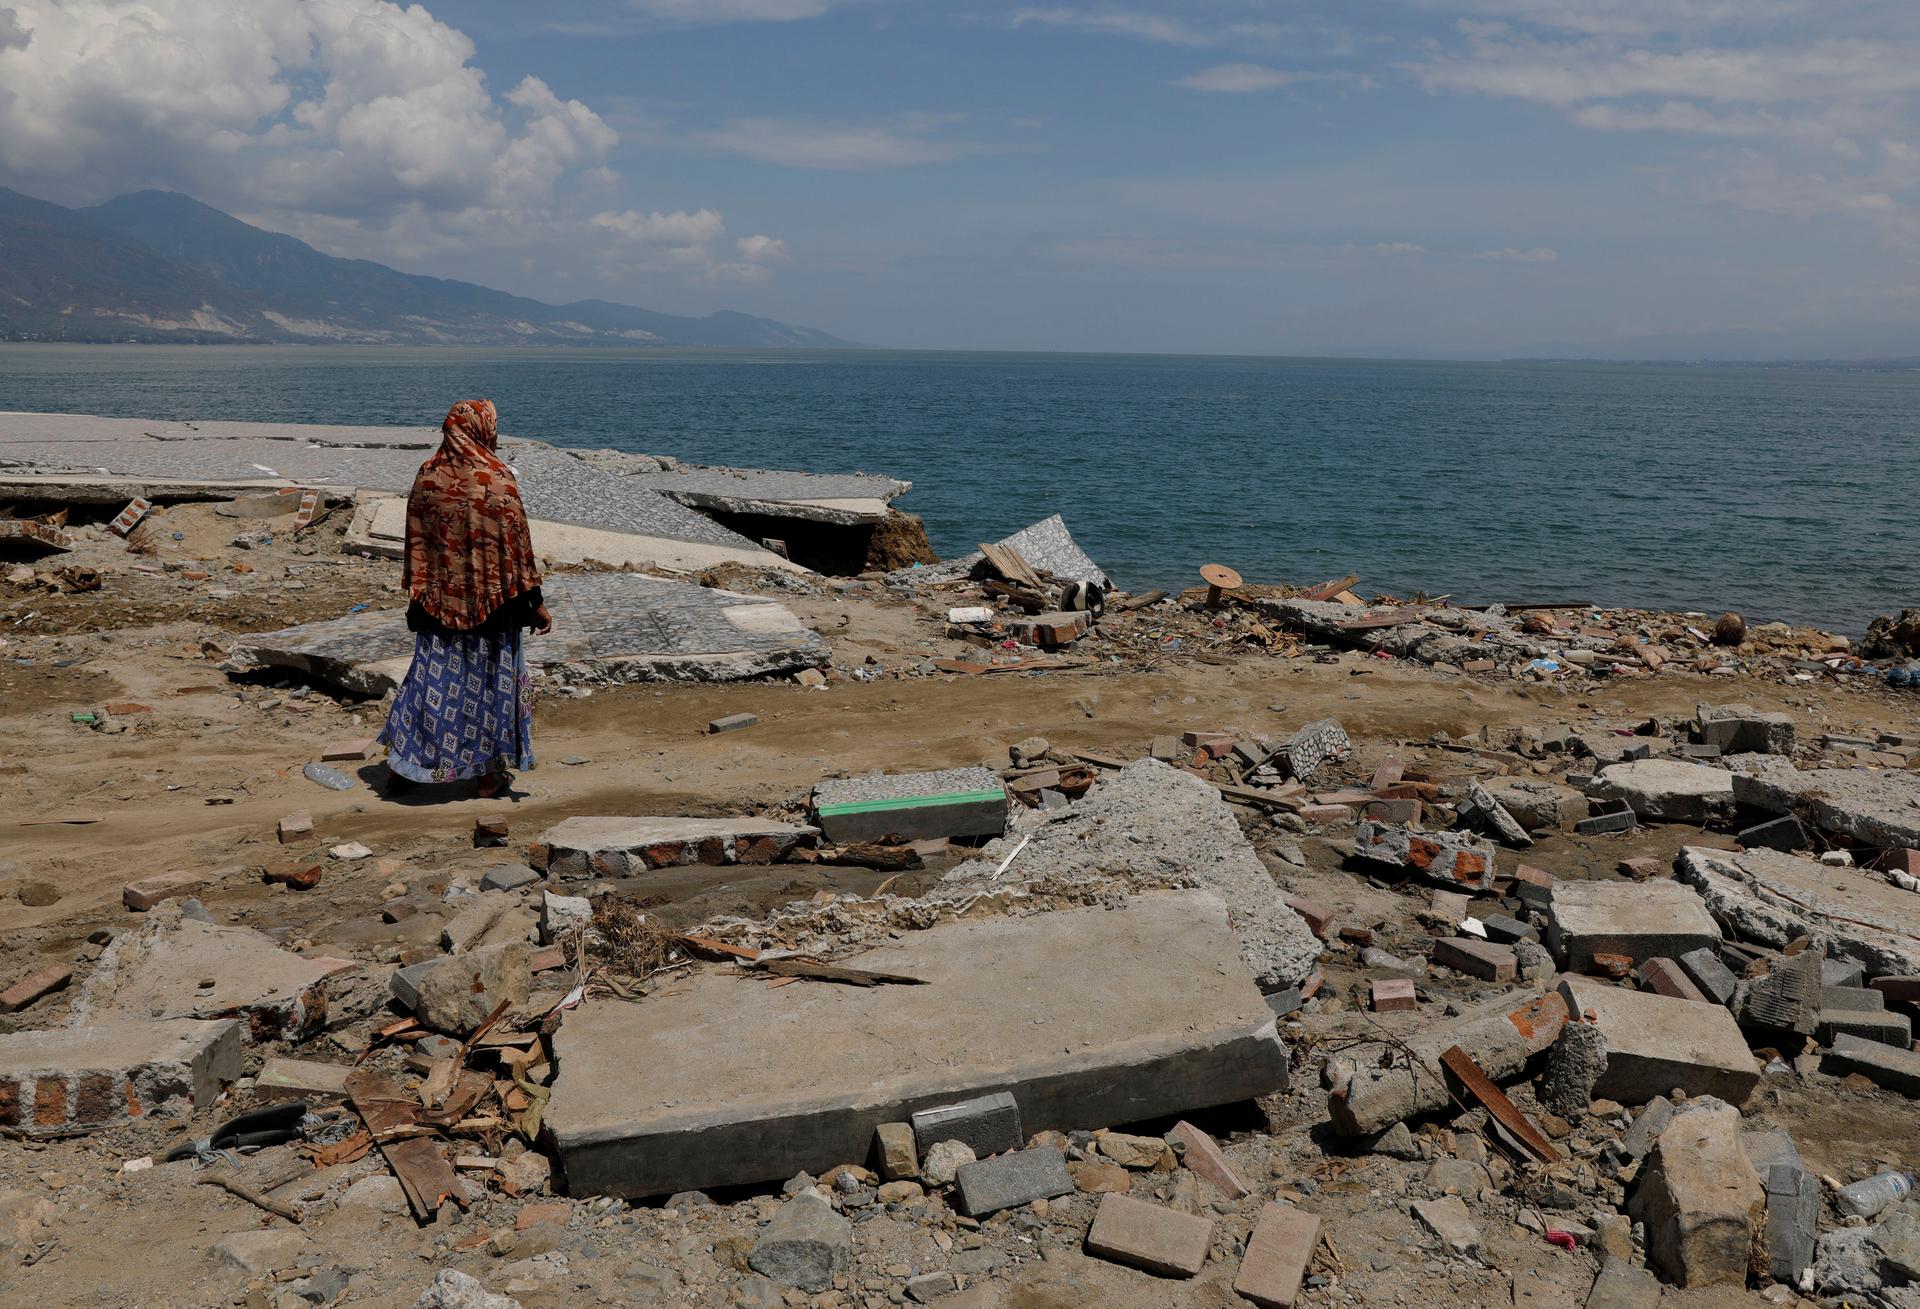 A woman wearing a head covering looks out on the ocean after a tsunami in Indonesia's Sulawesi Island..